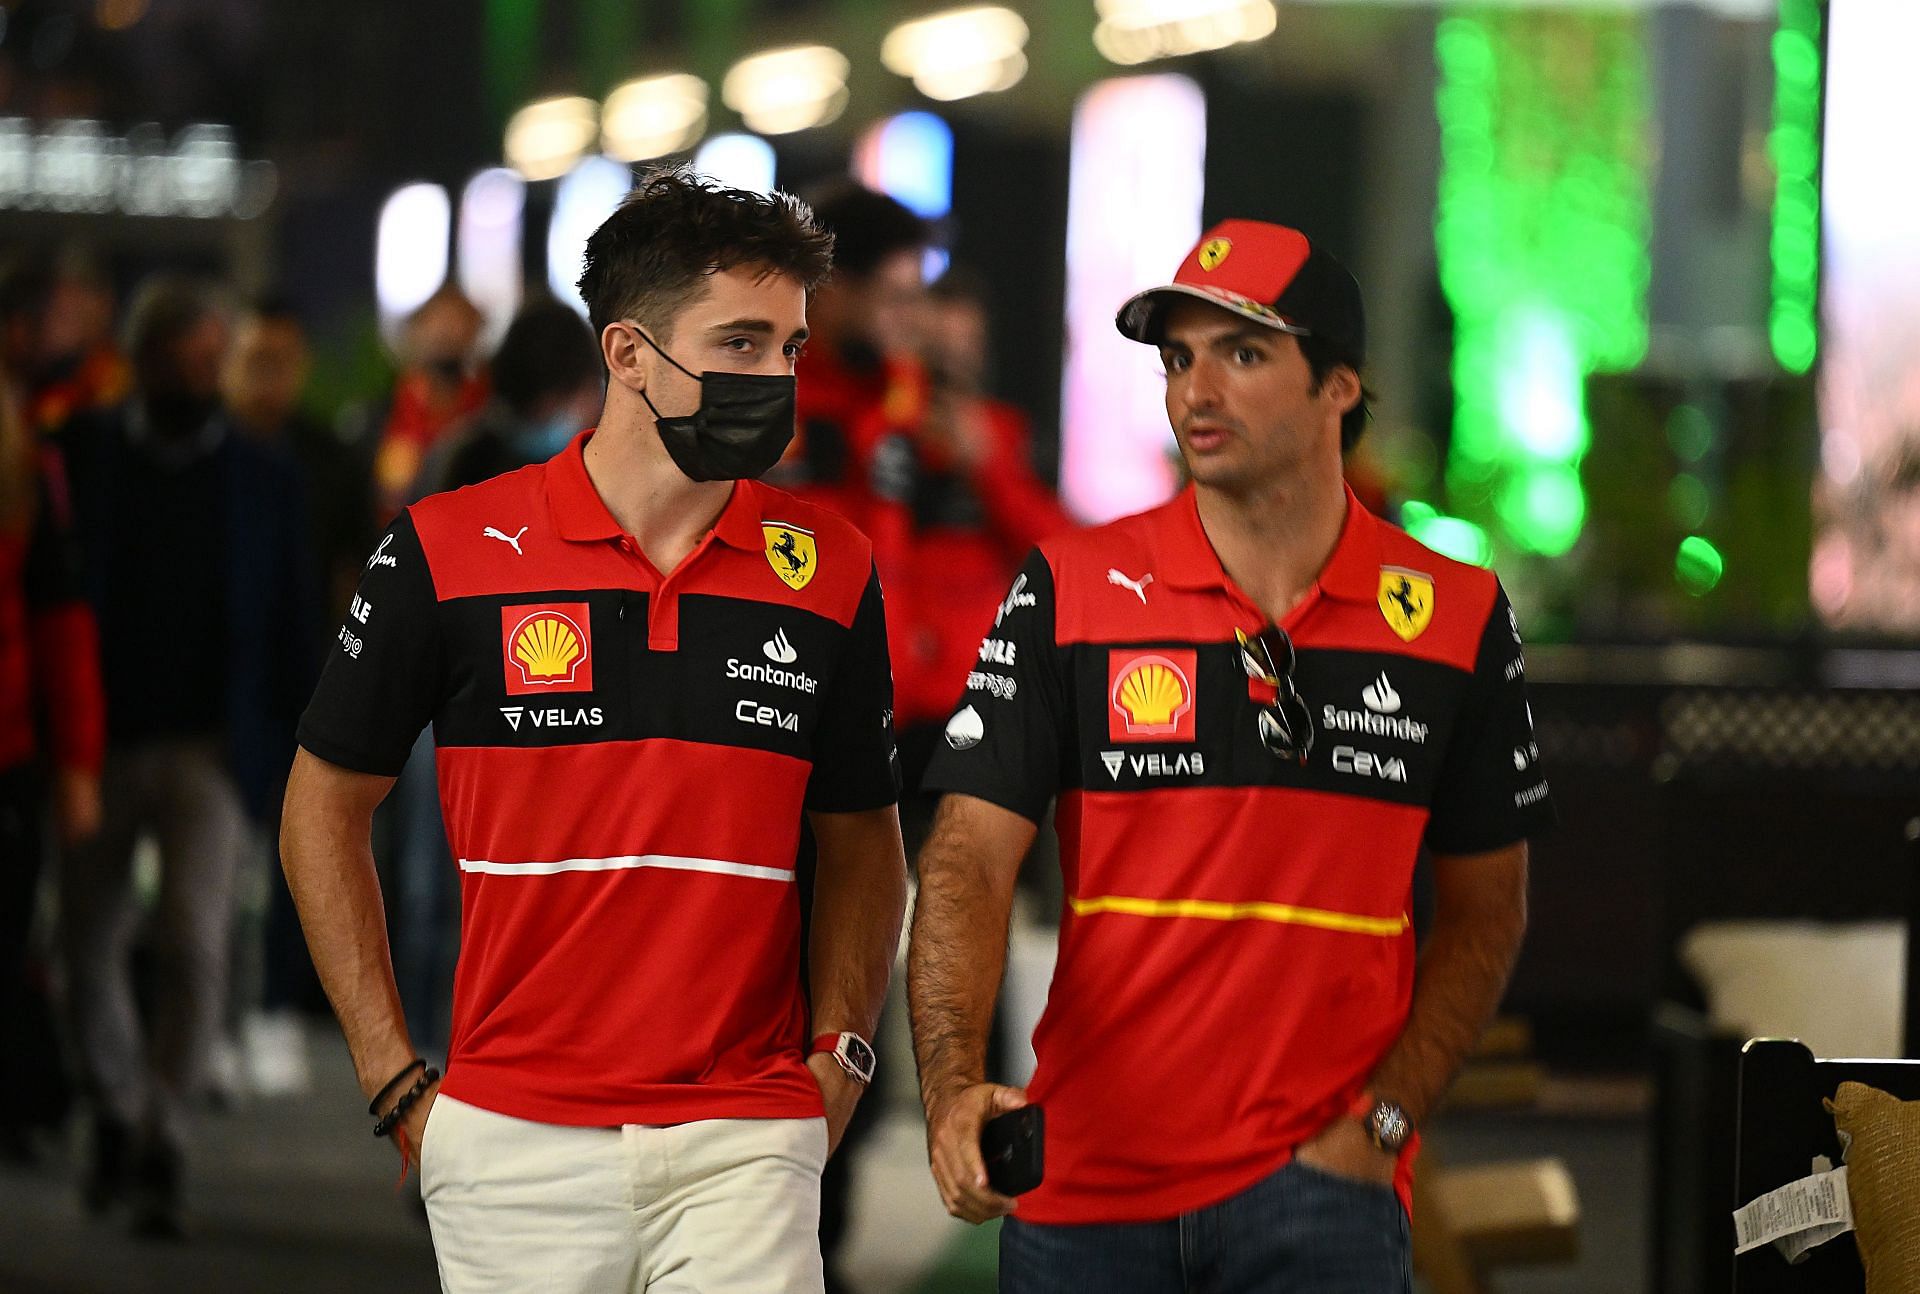 Carlos Sainz (right) and Charles Leclerc (left) at the Practice session of the Saudi Arabian GP